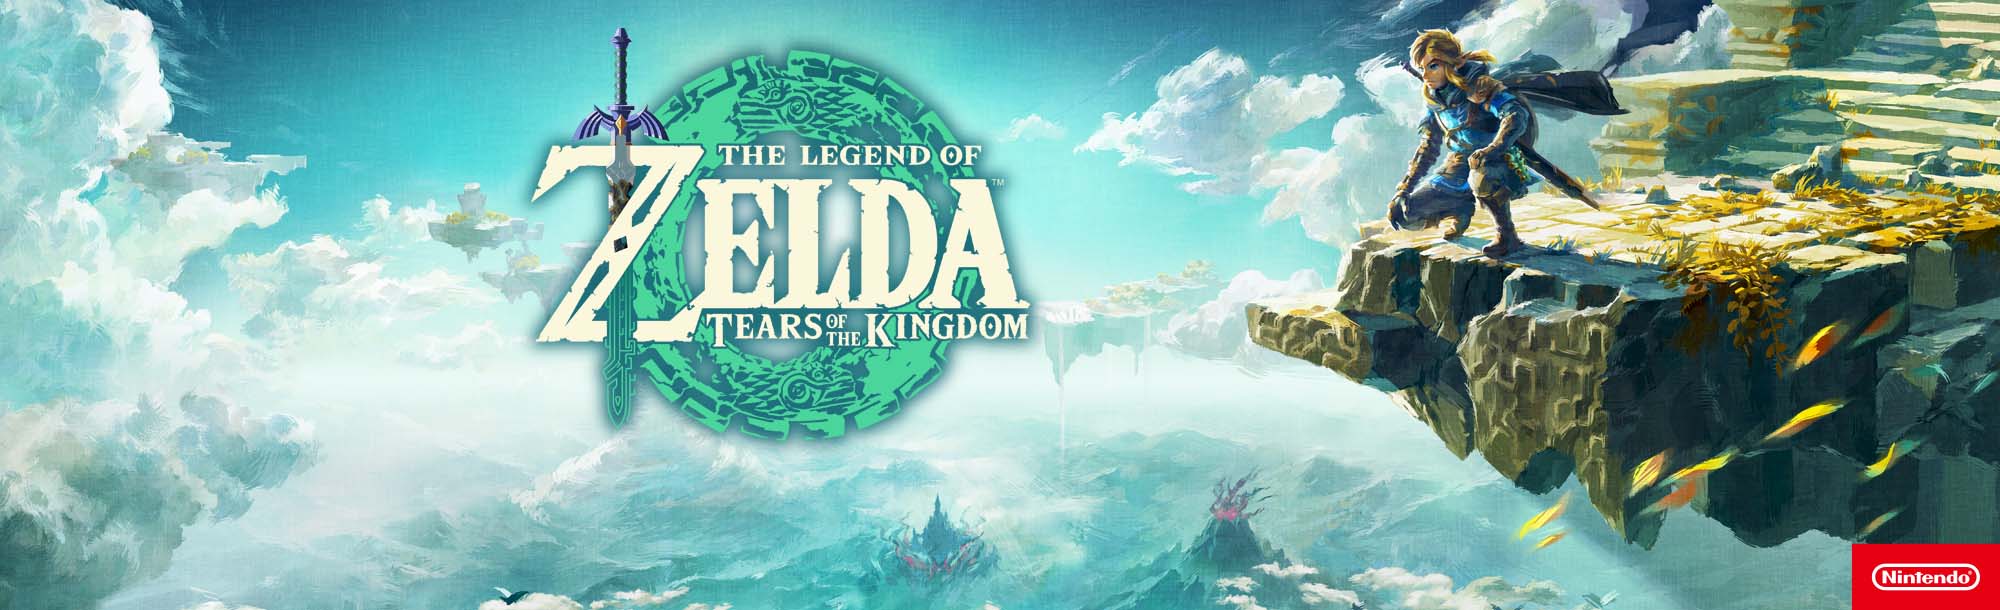 The Legend of Zelda Tears of The Kingdom. Warrior on ledge looking at clouds. 